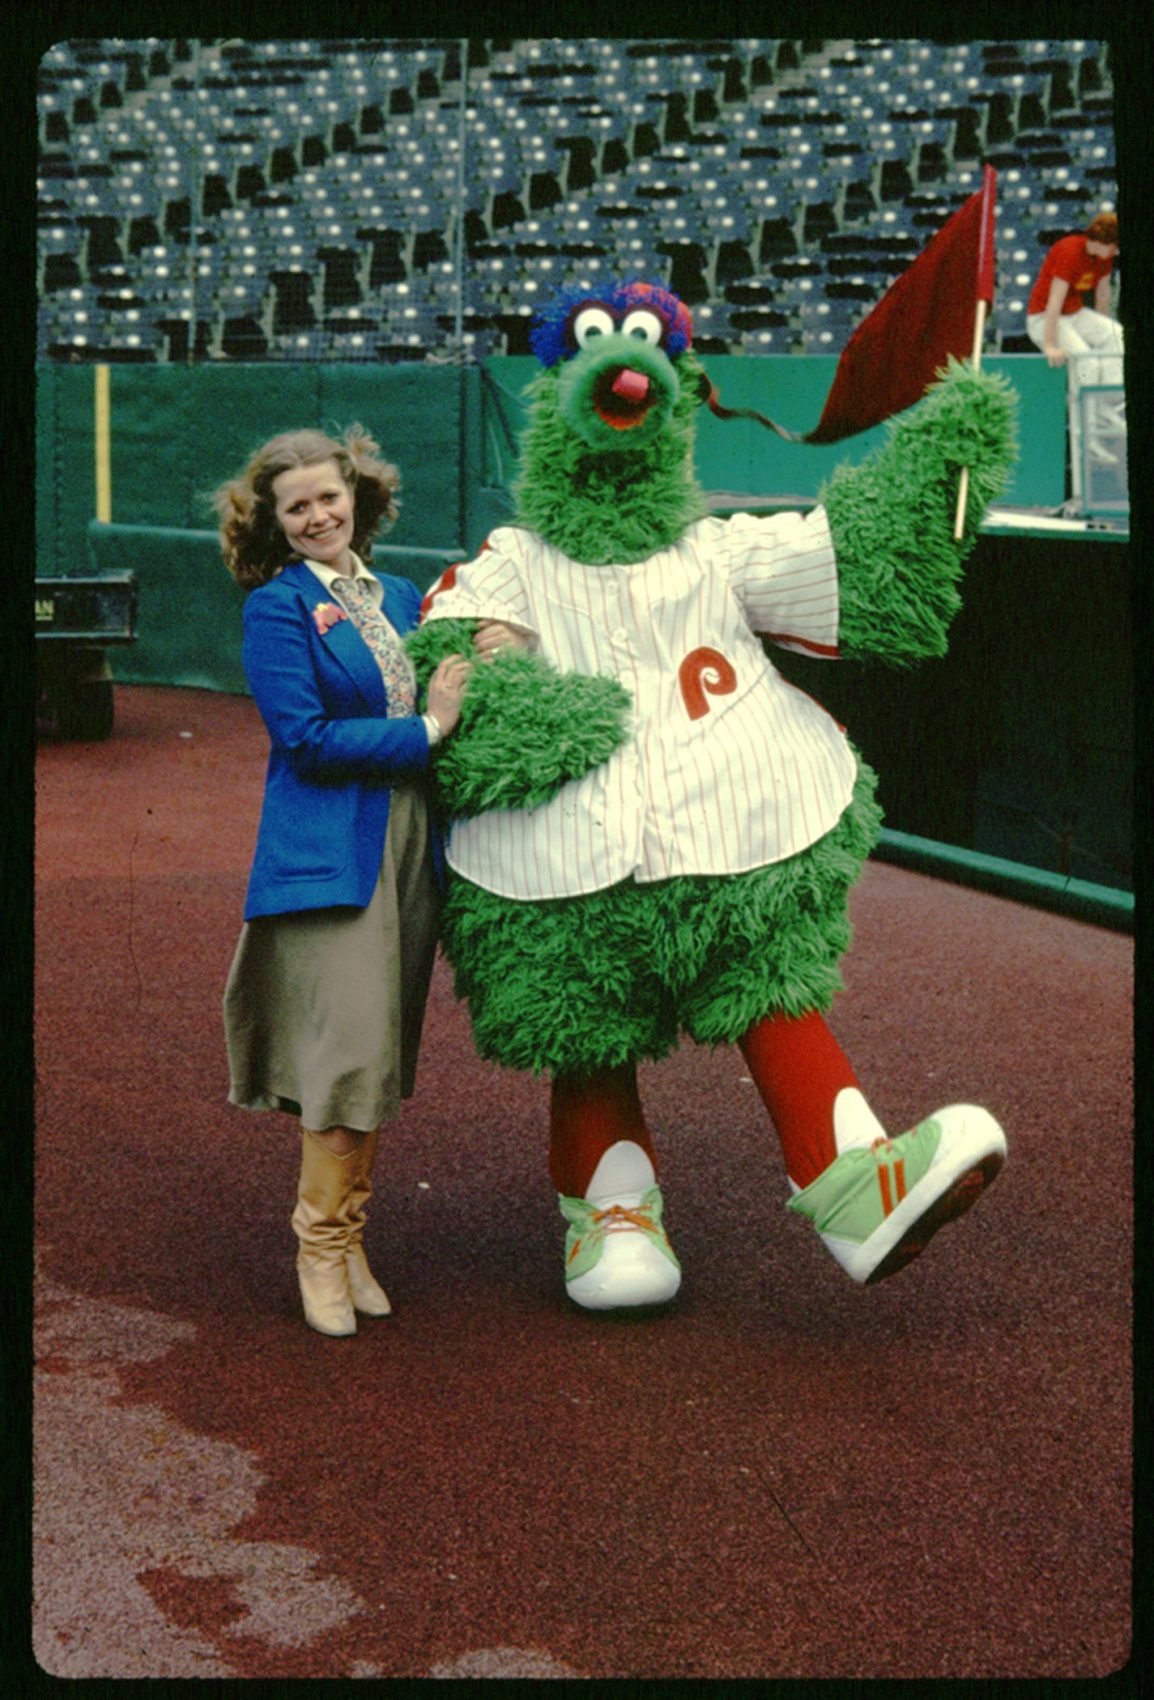 From Muppets To MLB: Bonnie Erickson, The Phillie Phanatic  And Dandy